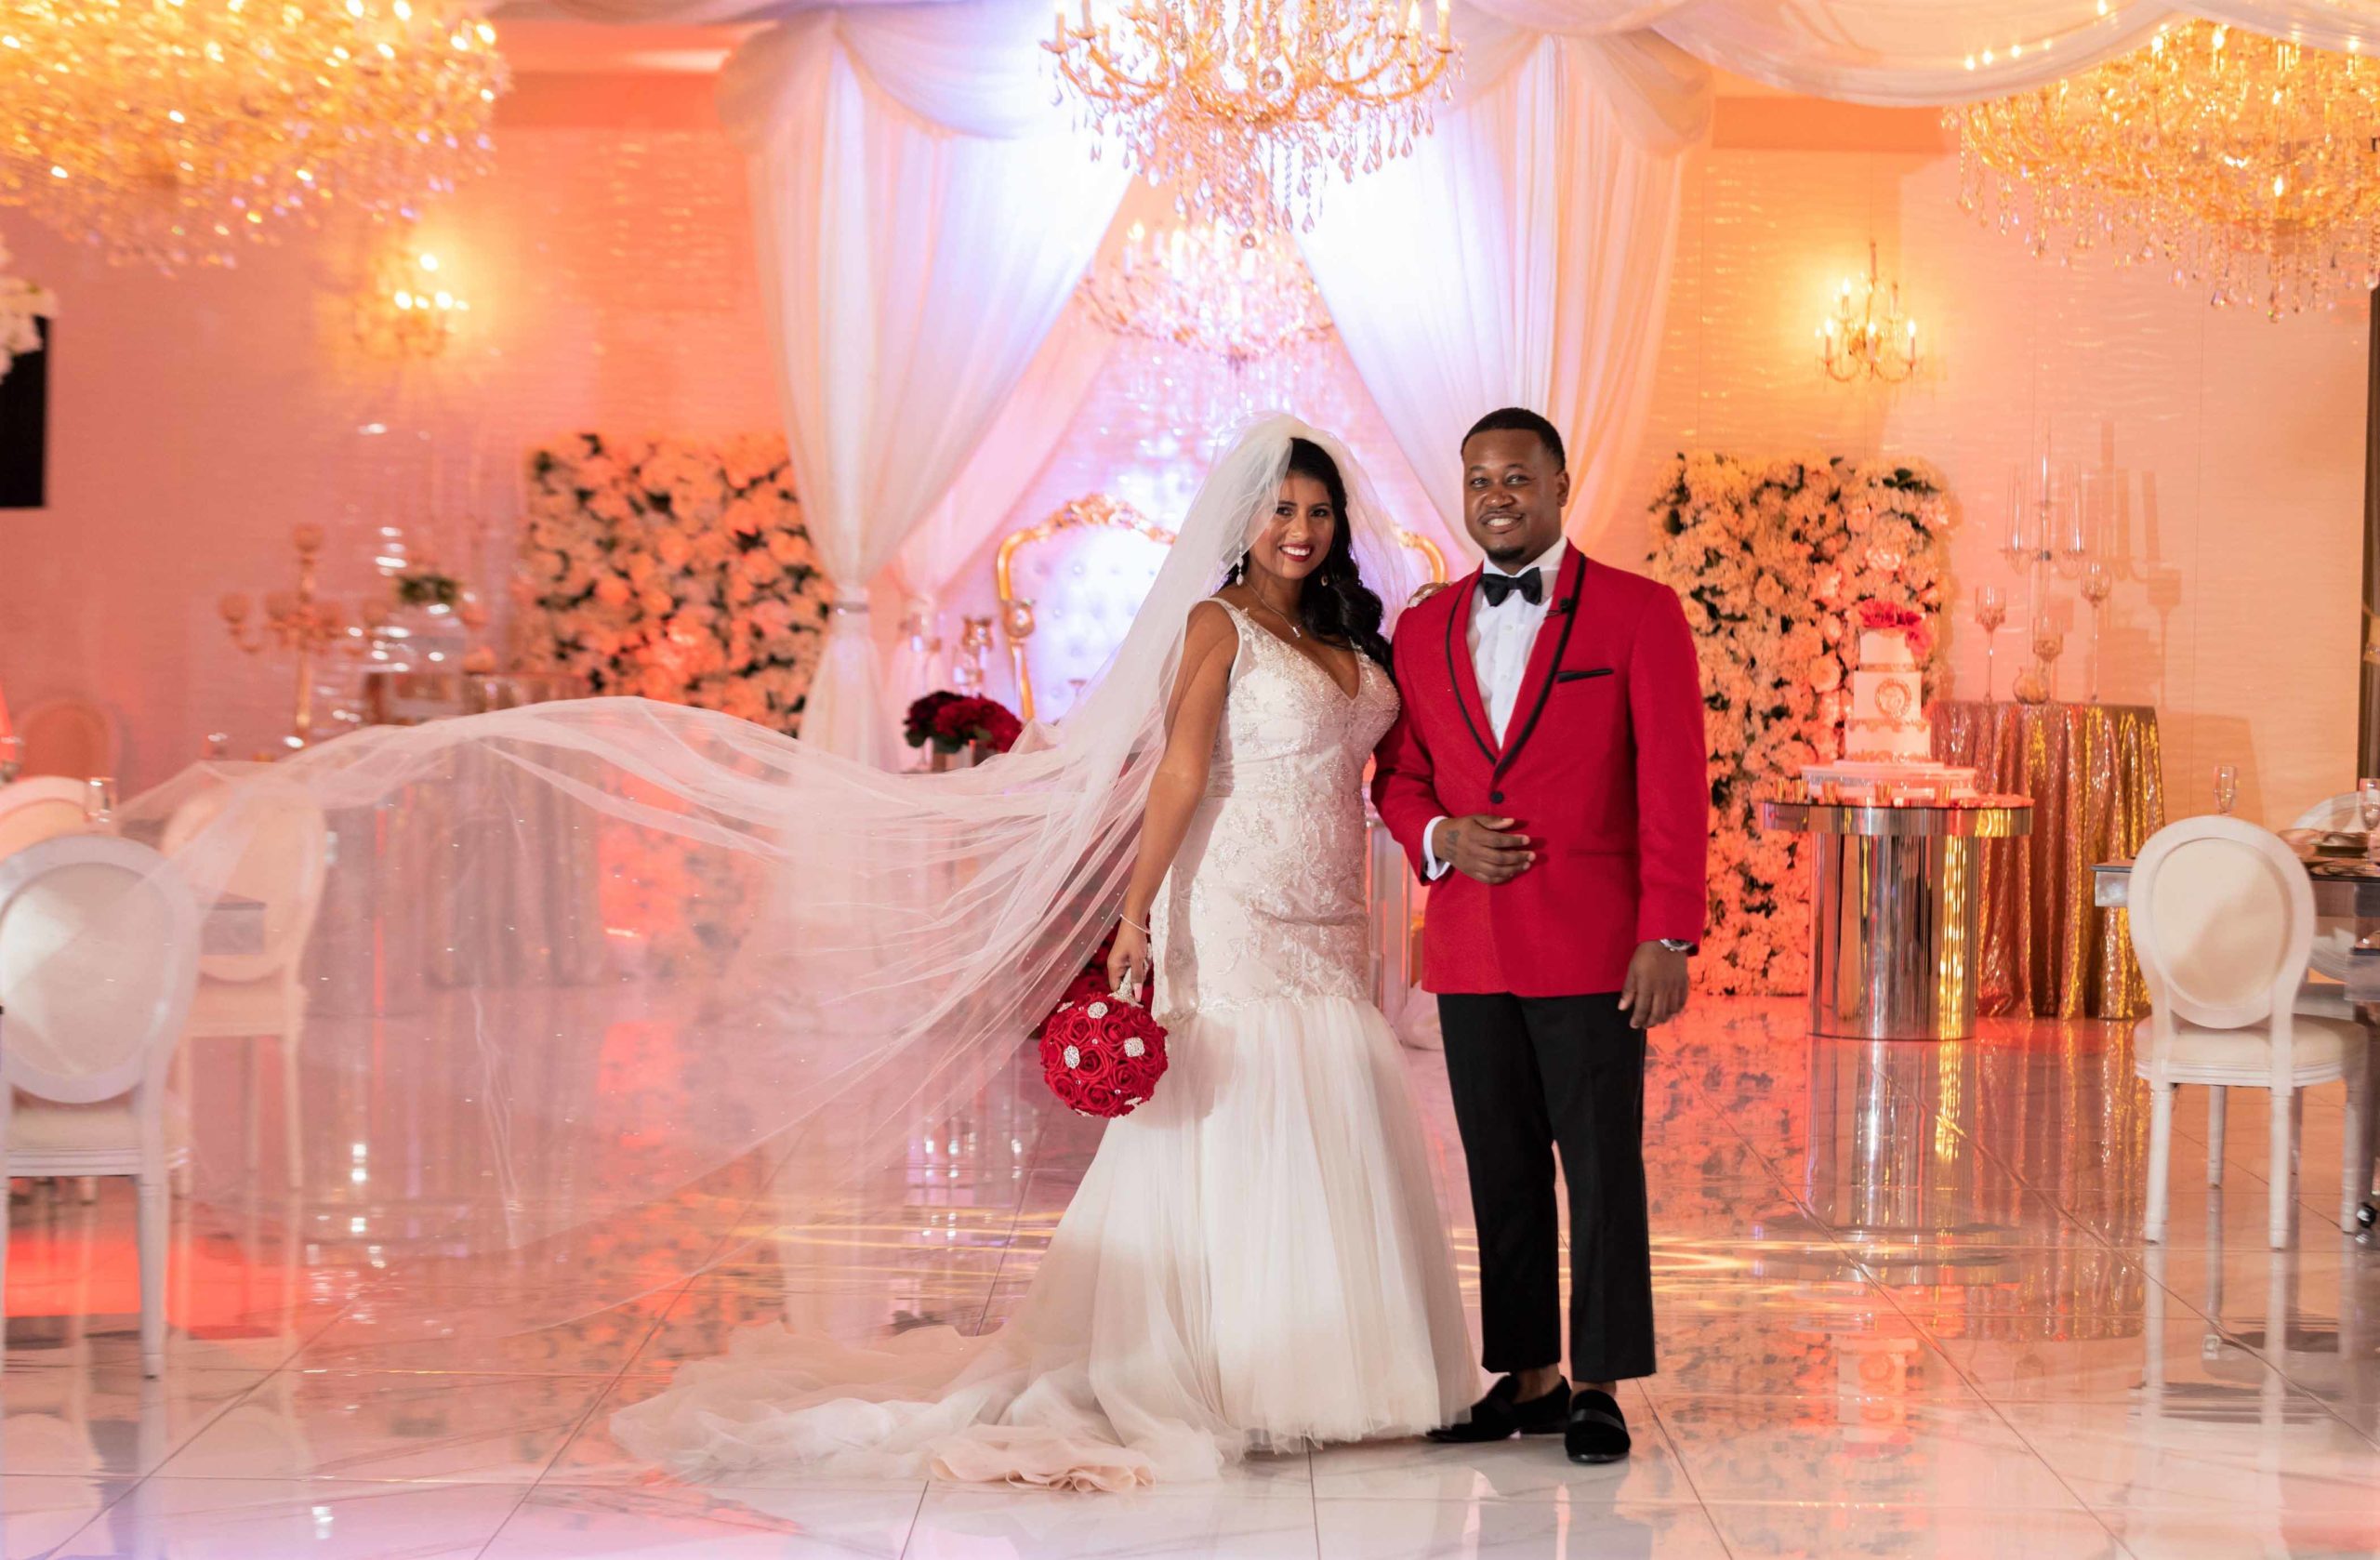 African American bride and groom standing arm and arm. Bride is wearing a gown and groom is wearing a red jacket